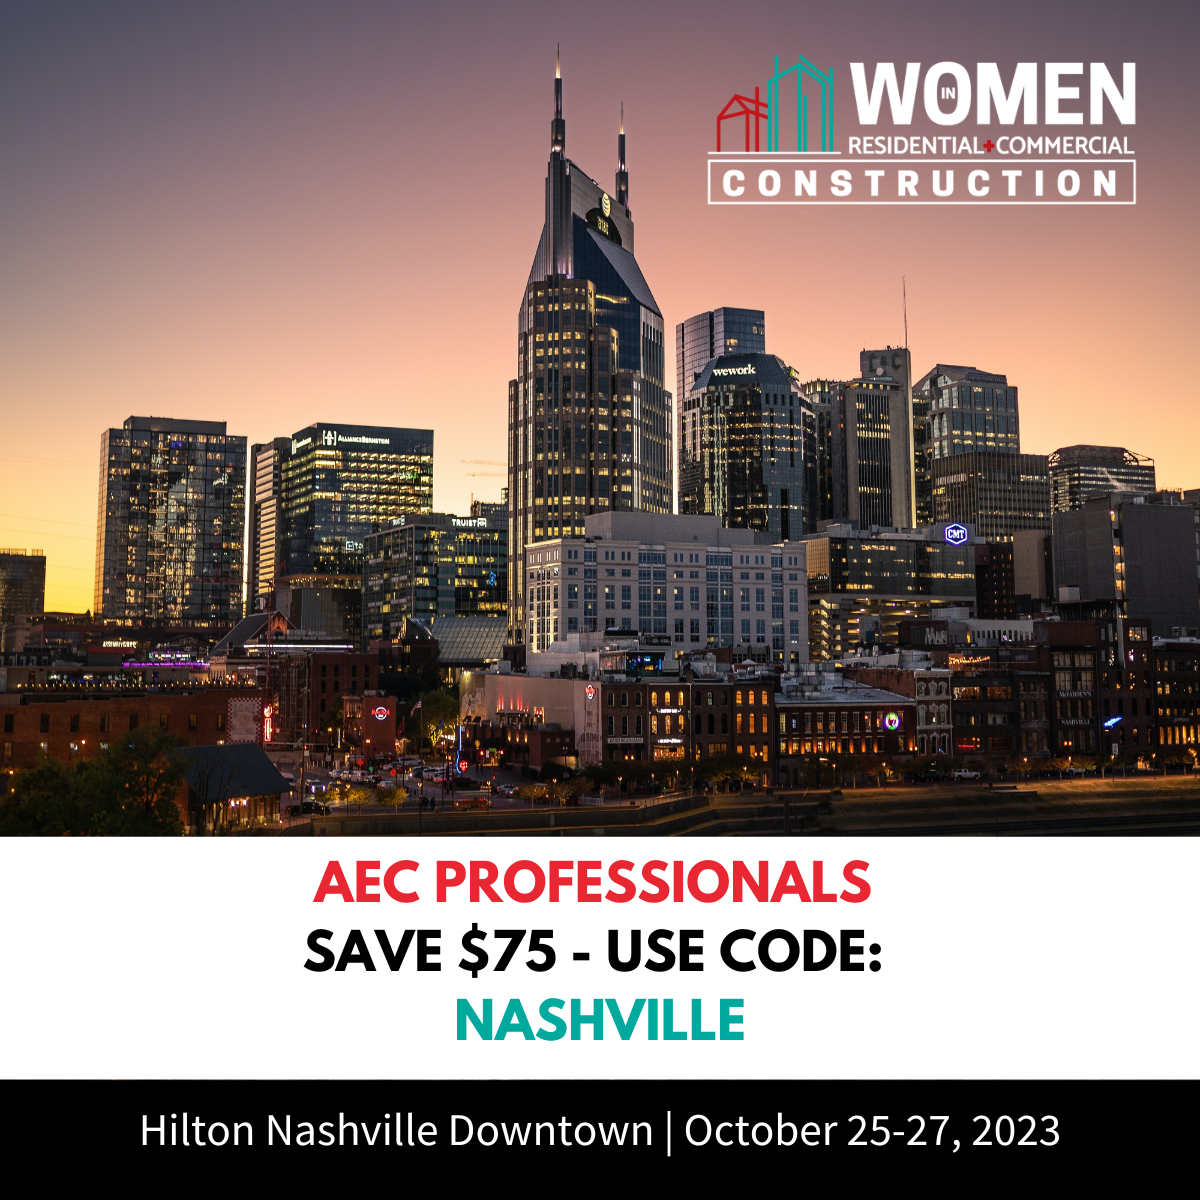  The 2023 Women in Residential and Commercial Construction Conference will take place at the Nashville Hilton Downtown, Oct. 25-27, Nashville, Tenn. 